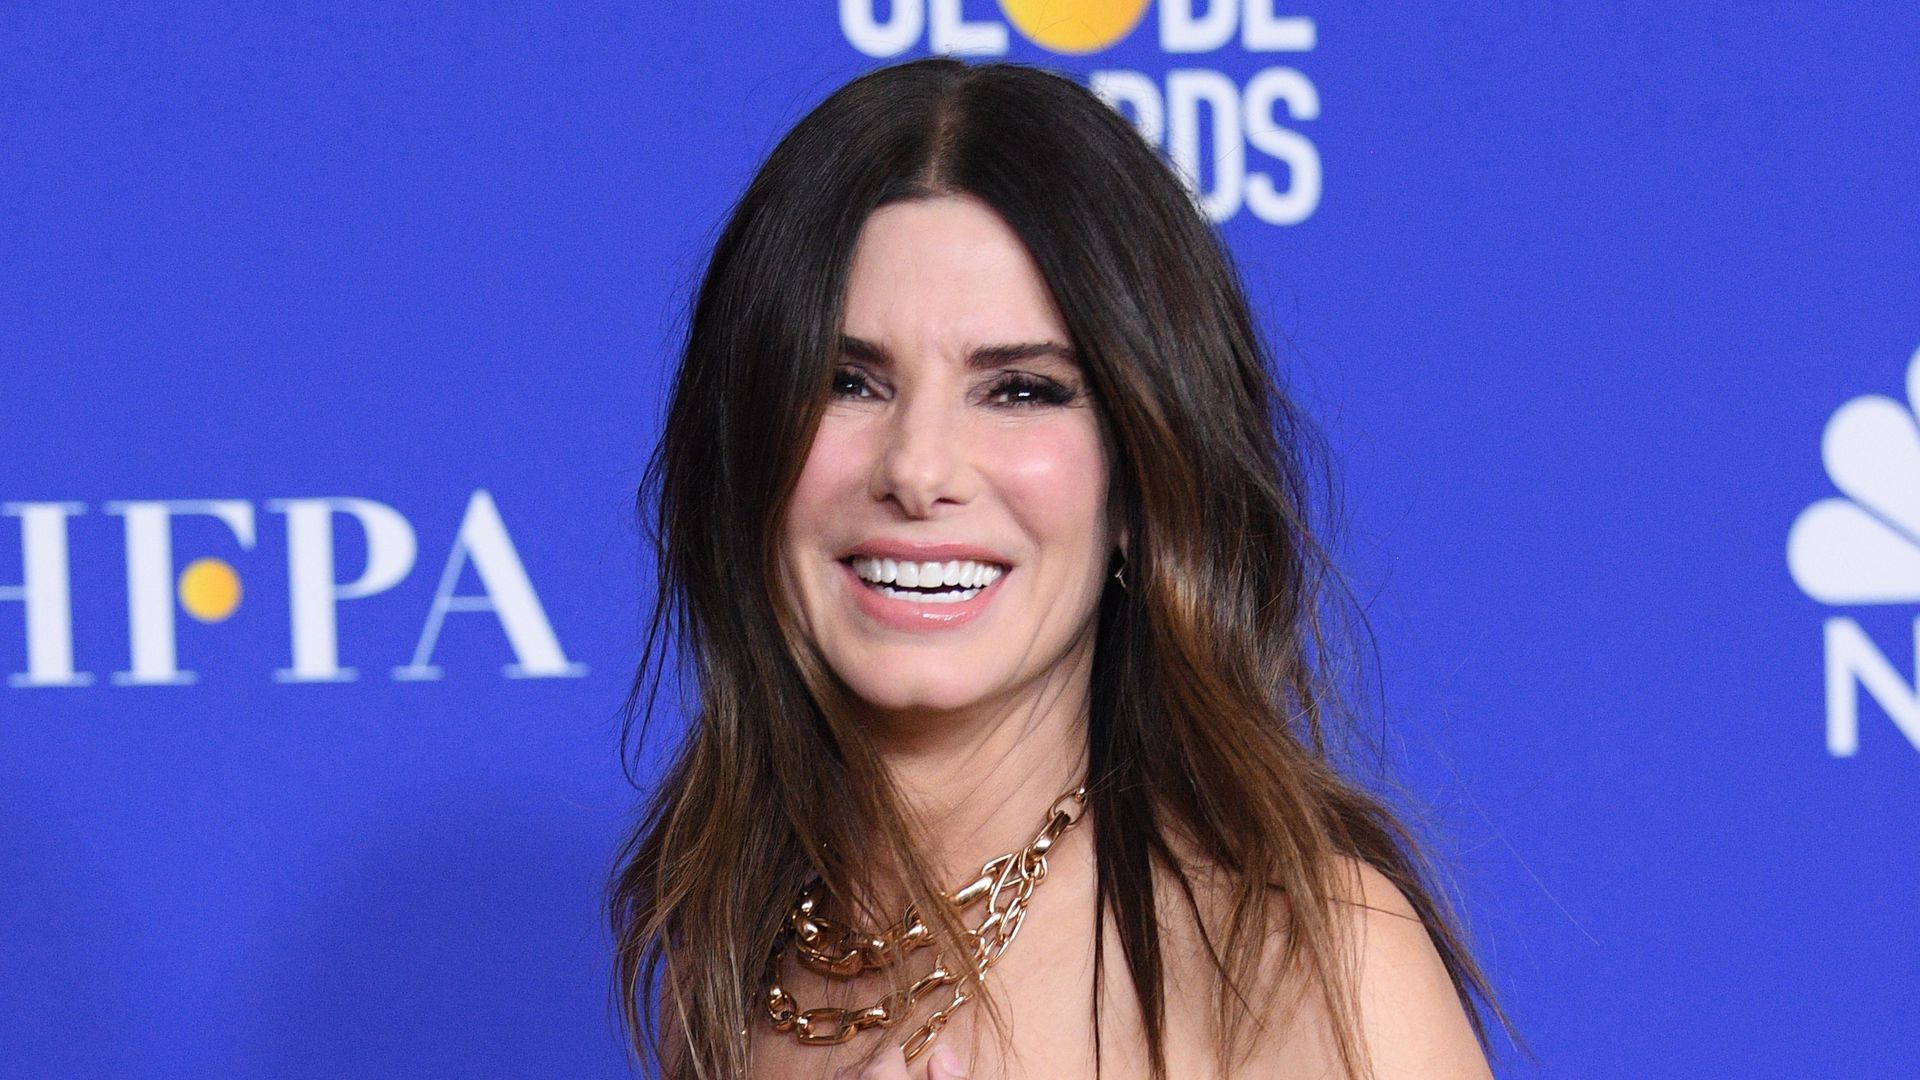 Sandra Bullock poses in the press room during the 77th Annual Golden Globe Awards at The Beverly Hilton Hotel on January 05, 2020 in Beverly Hills, California